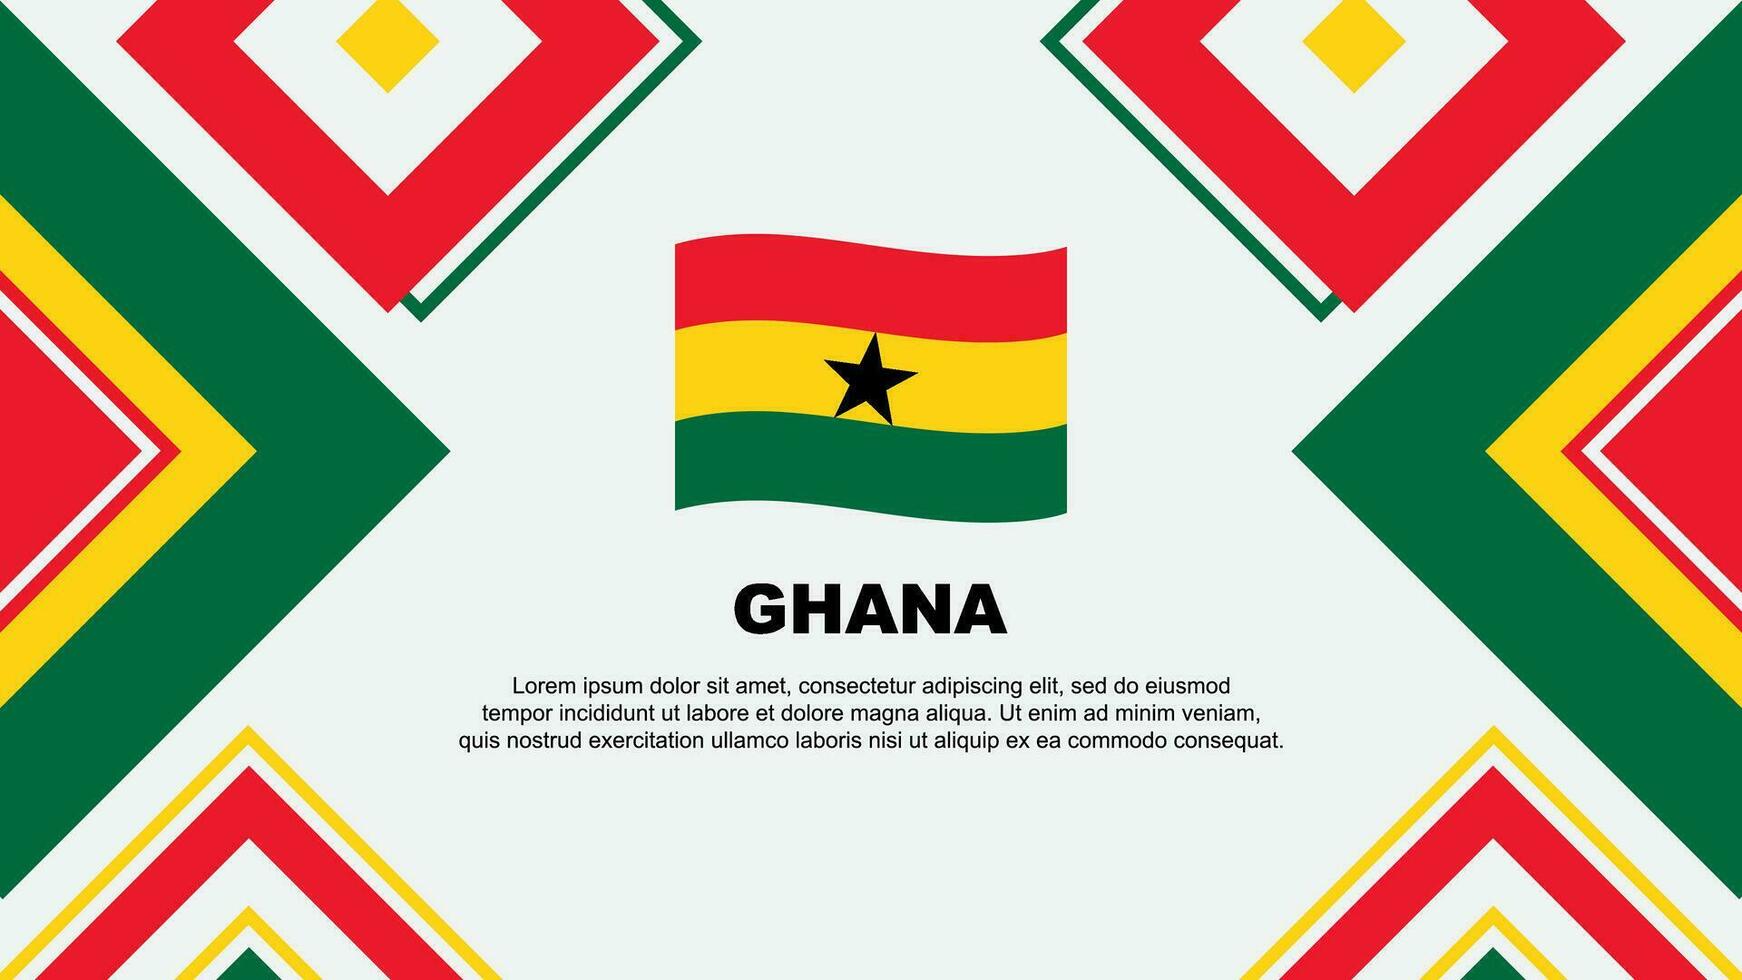 Ghana Flag Abstract Background Design Template. Ghana Independence Day Banner Wallpaper Vector Illustration. Ghana Independence Day